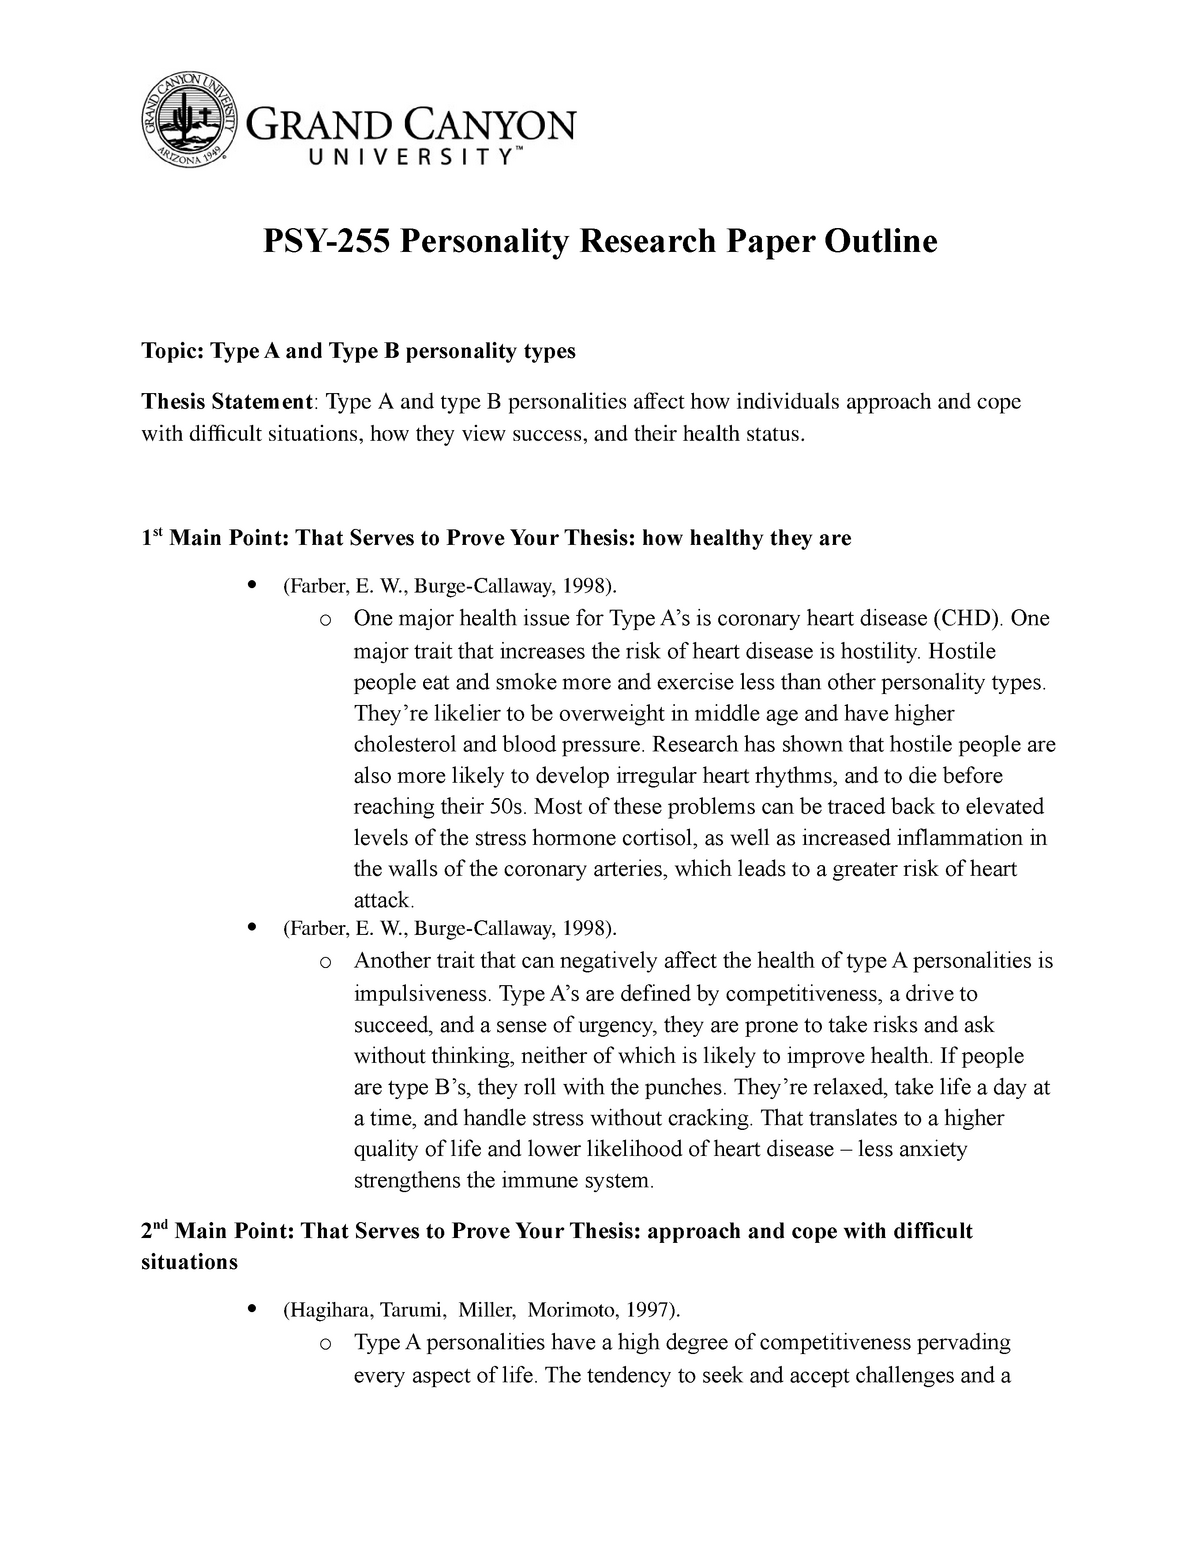 research paper for personality development